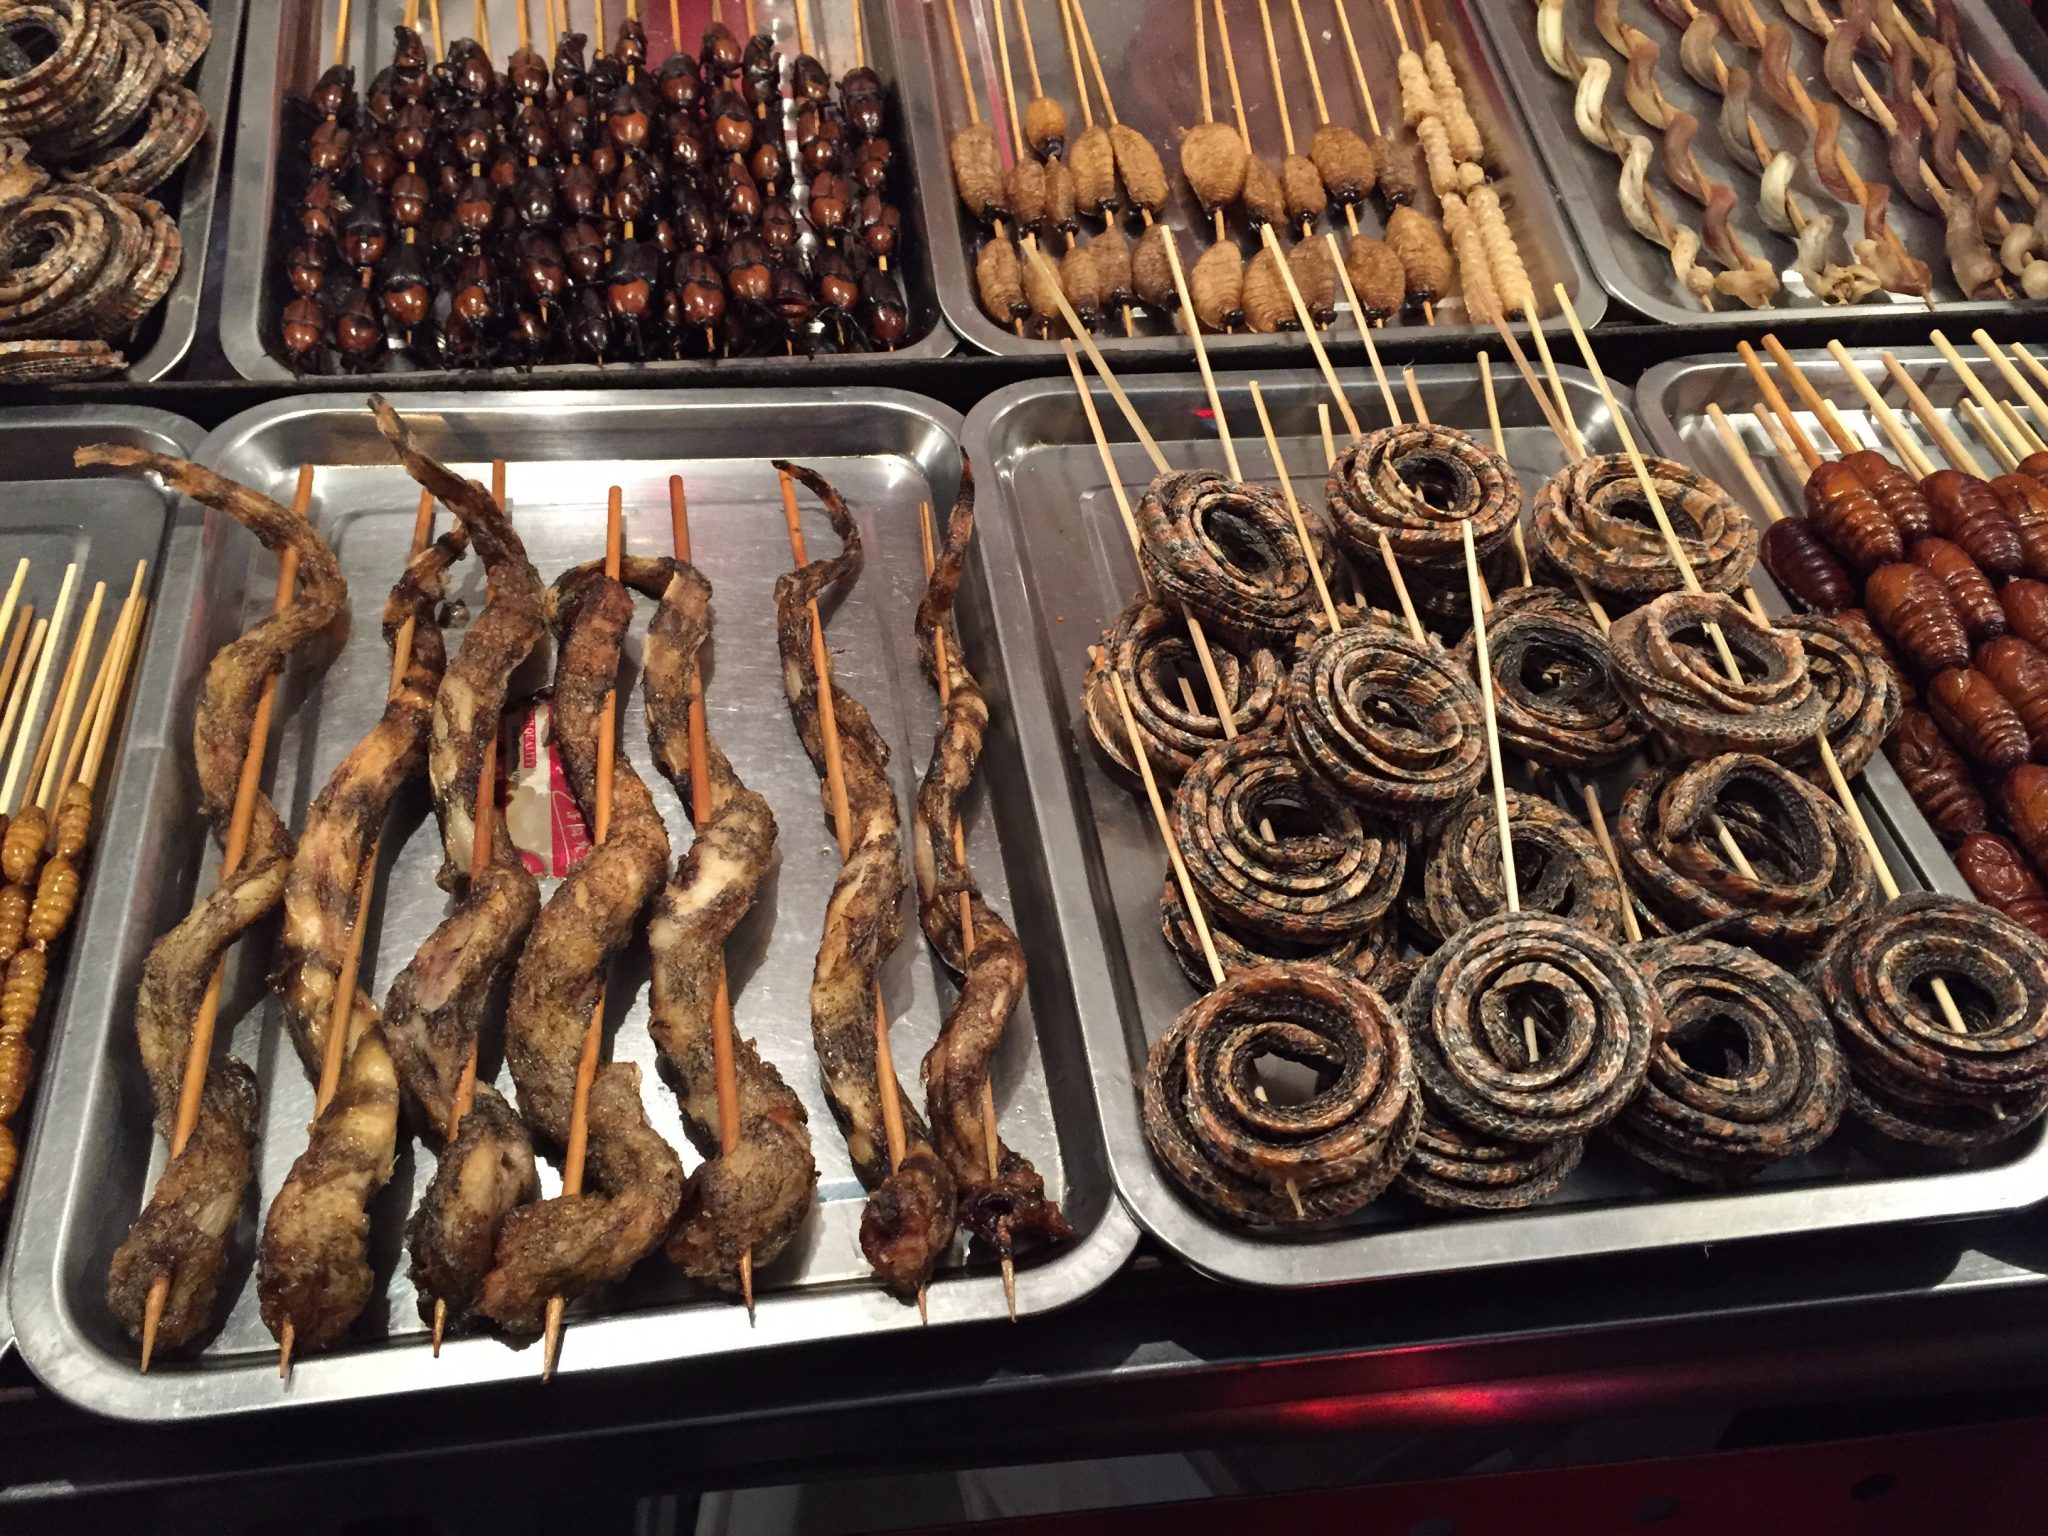 Donghuamen Night Market: Weird Things Chinese People Eat - Lust for the